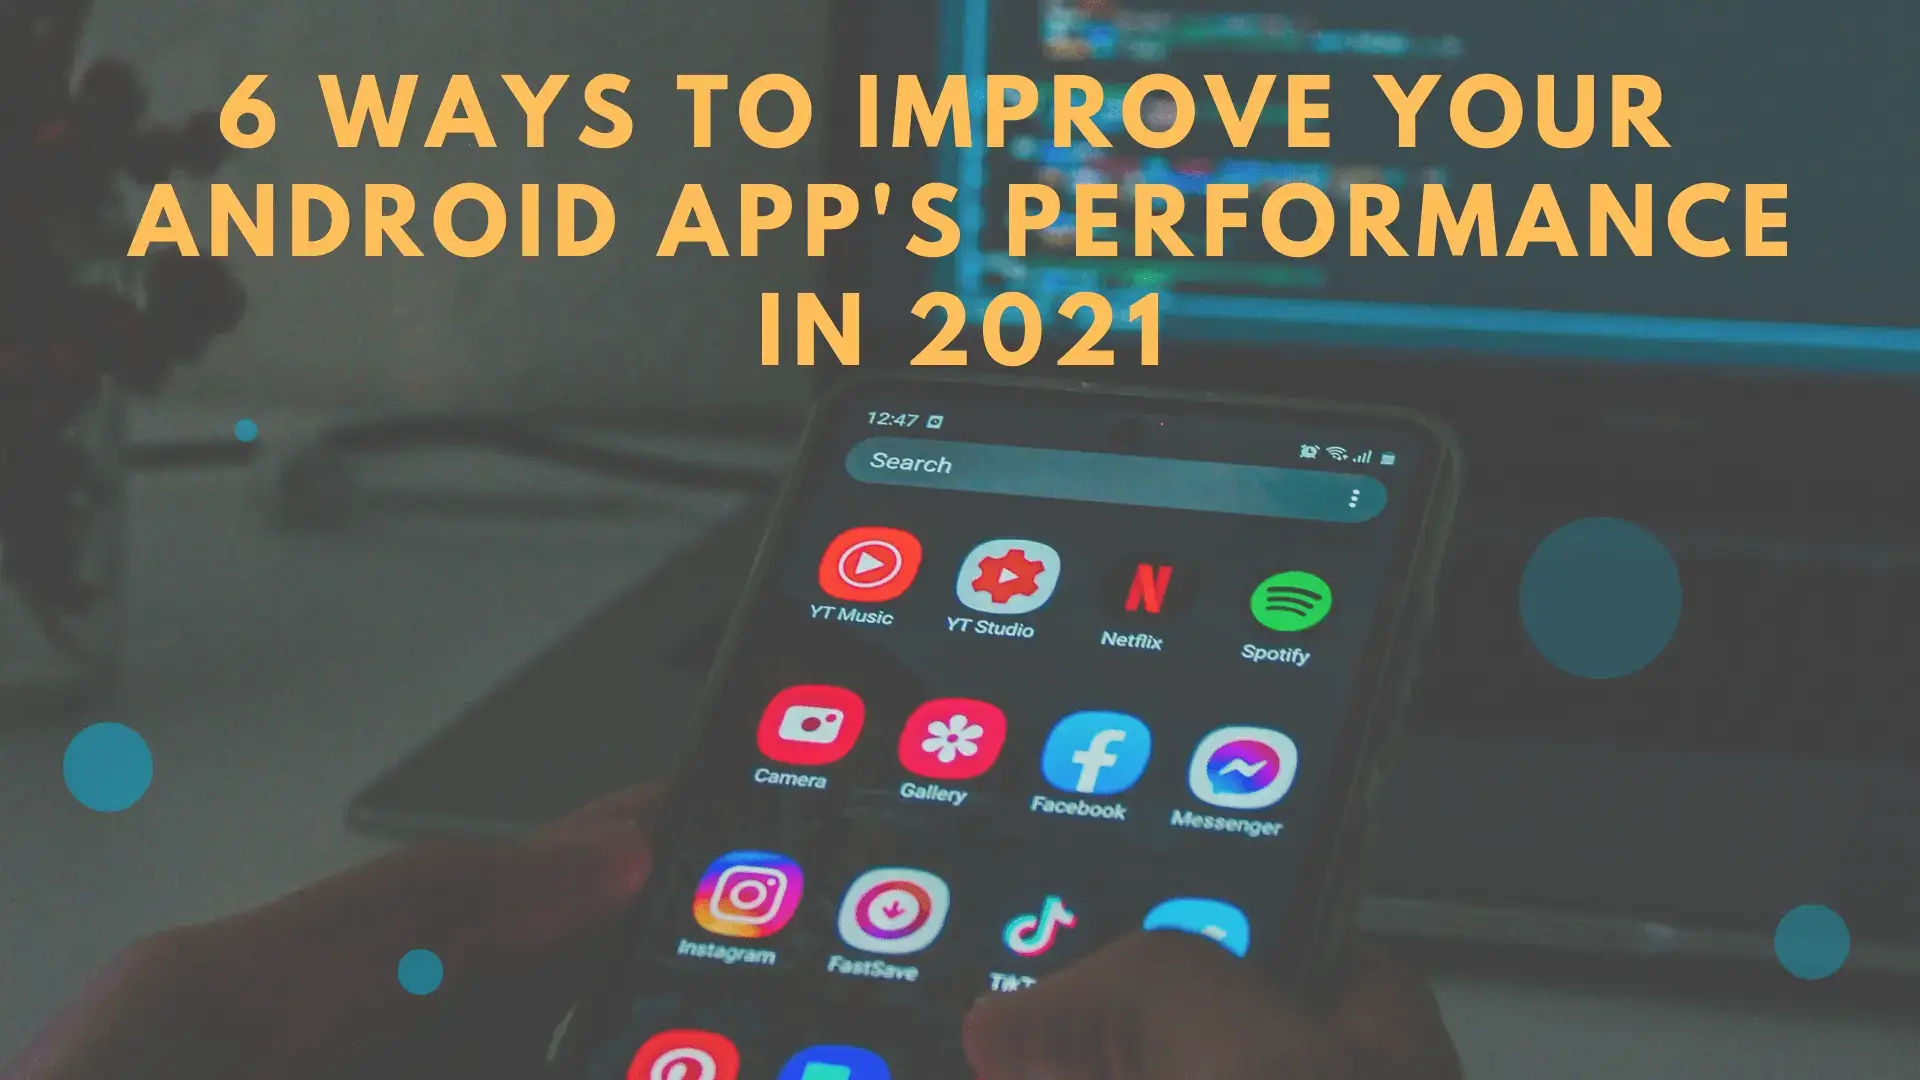 6-Ways-To-Improve-Your-Android-Apps-Performance-1